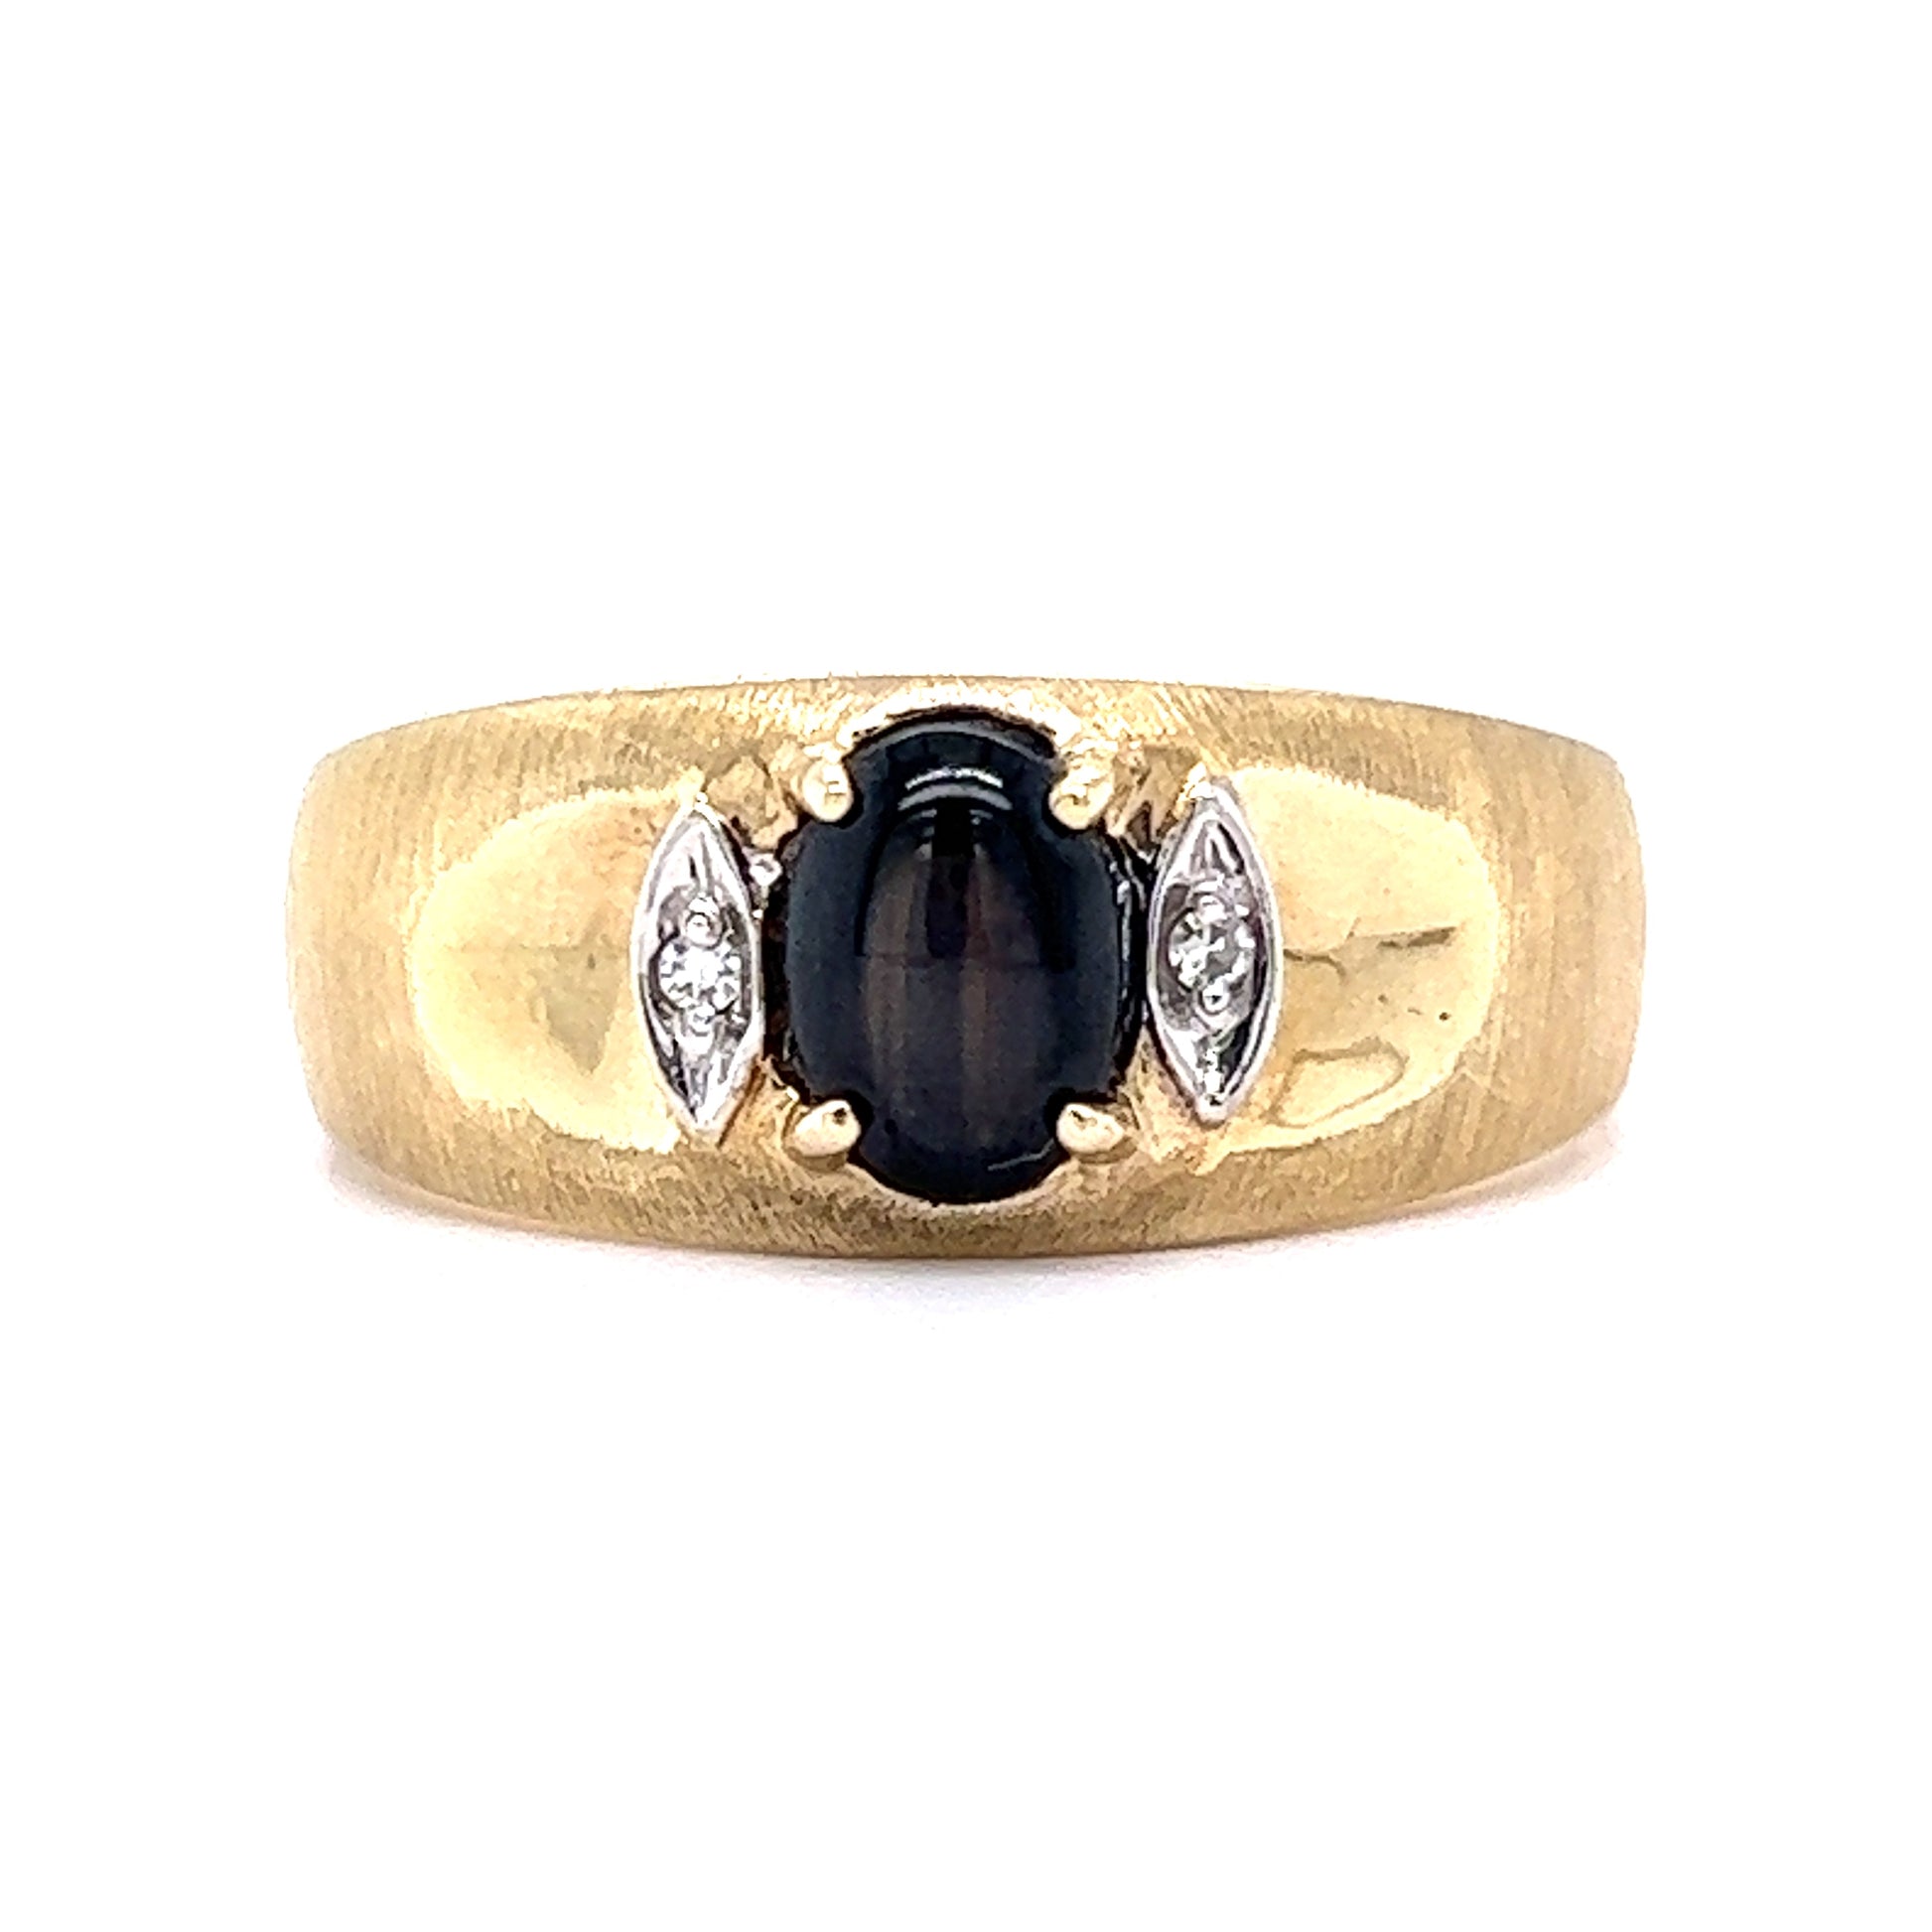 1.02 Cabochon Cut Cat's Eye Cocktail Ring in 14k Yellow GoldComposition: 14 Karat Yellow Gold Ring Size: 10.0 Total Diamond Weight: .028ct Total Gram Weight: 5.8 g Inscription: 14k
      